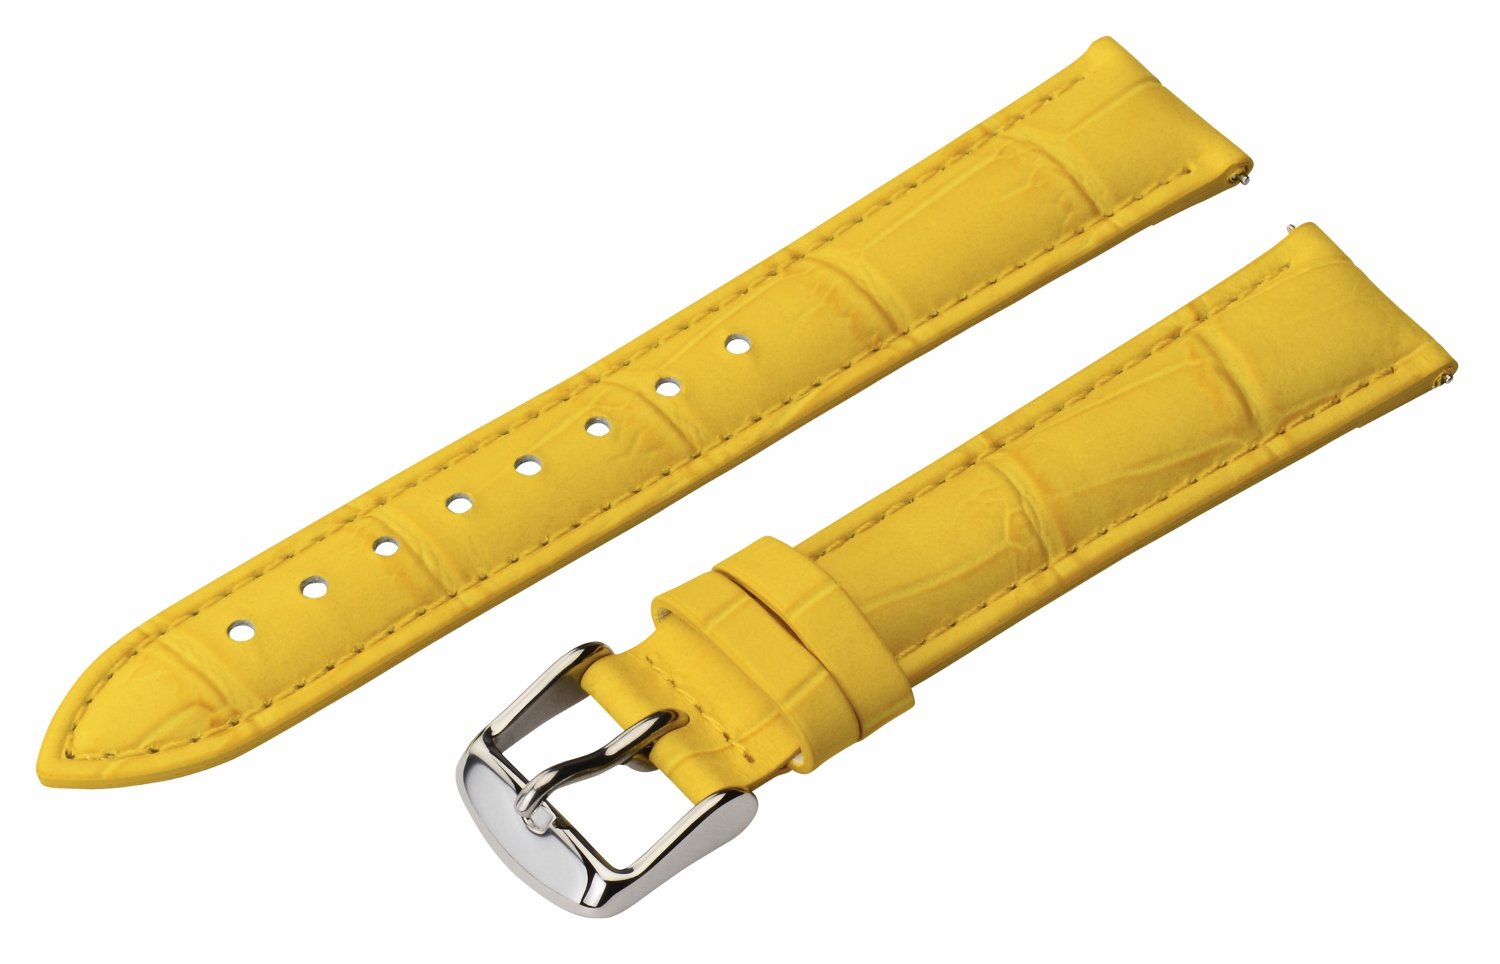 Clockwork Synergy - 2 Piece Ss Leather Classic Croco Grain Interchangeable Replacement Watch Band Strap 13mm - Solid Yellow - Men Women